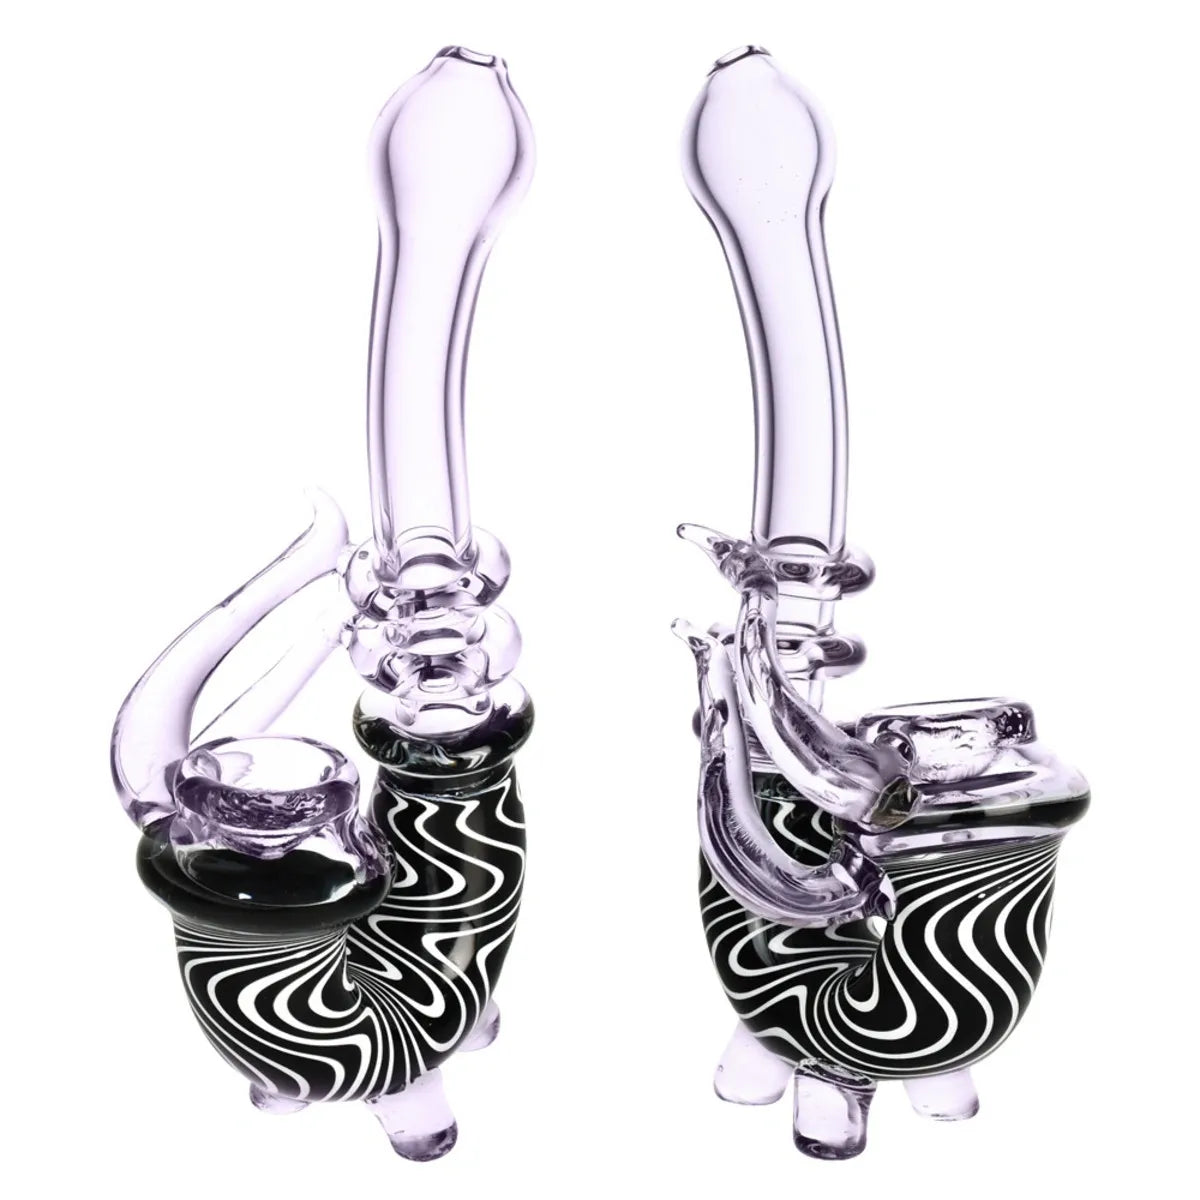 Psychedelic Black & White Waves Stand-up Sherlock Pipe 7"